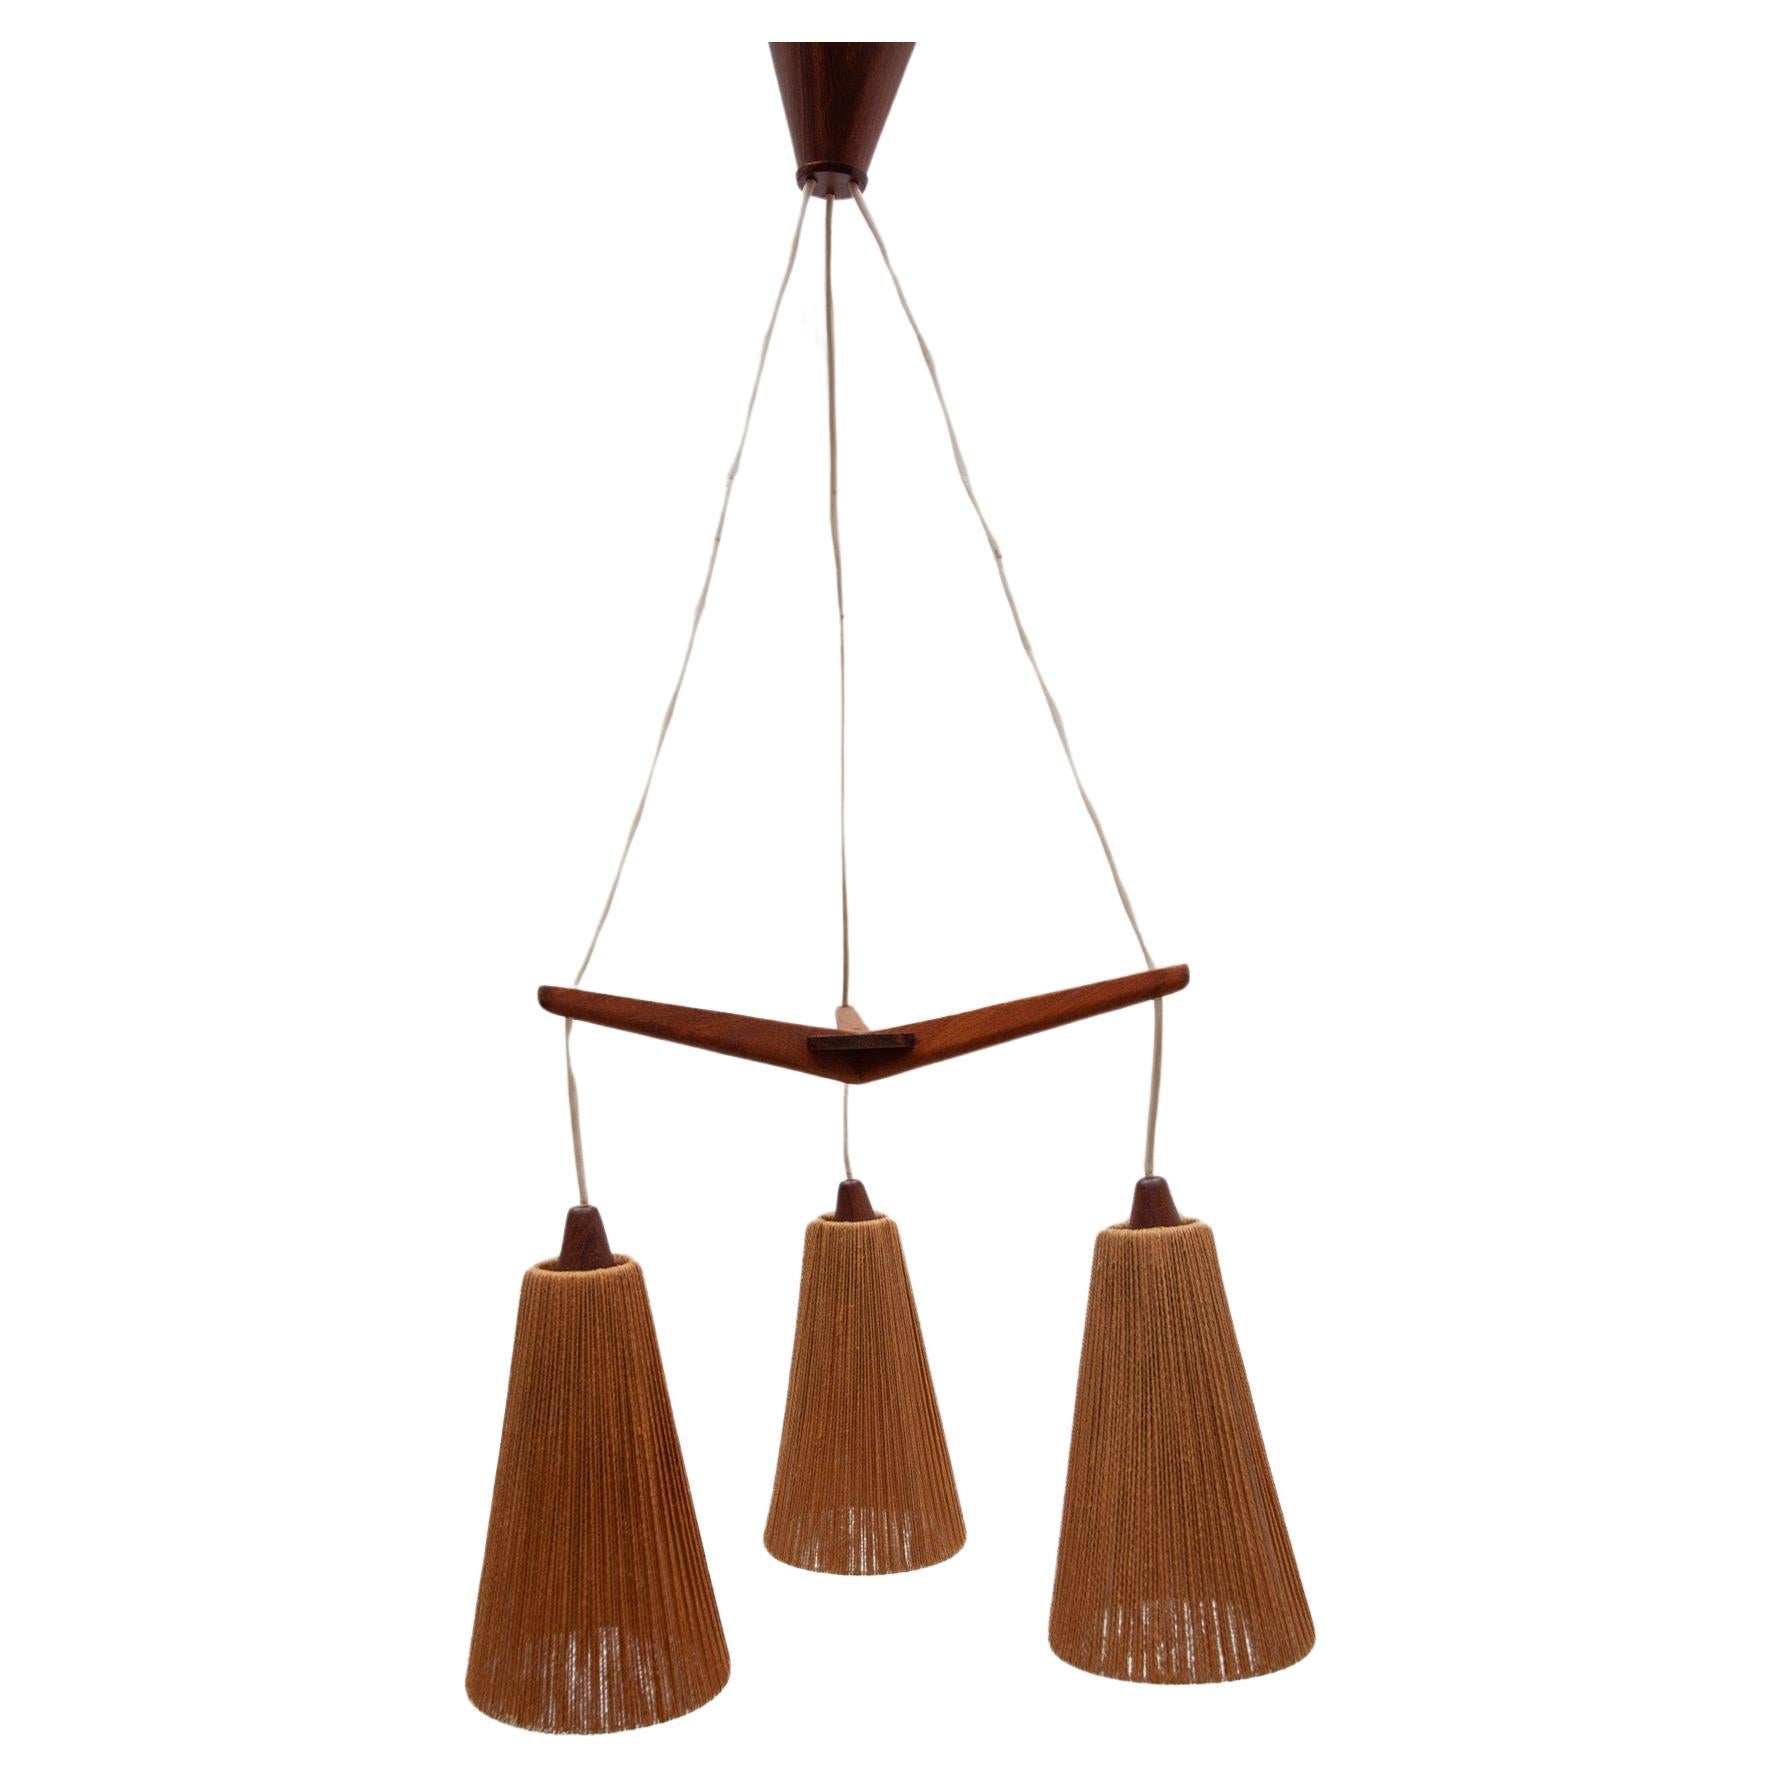 Teak and Jute Cord Pendant Cascade Lamp by Temde, Germany, 1960s For Sale